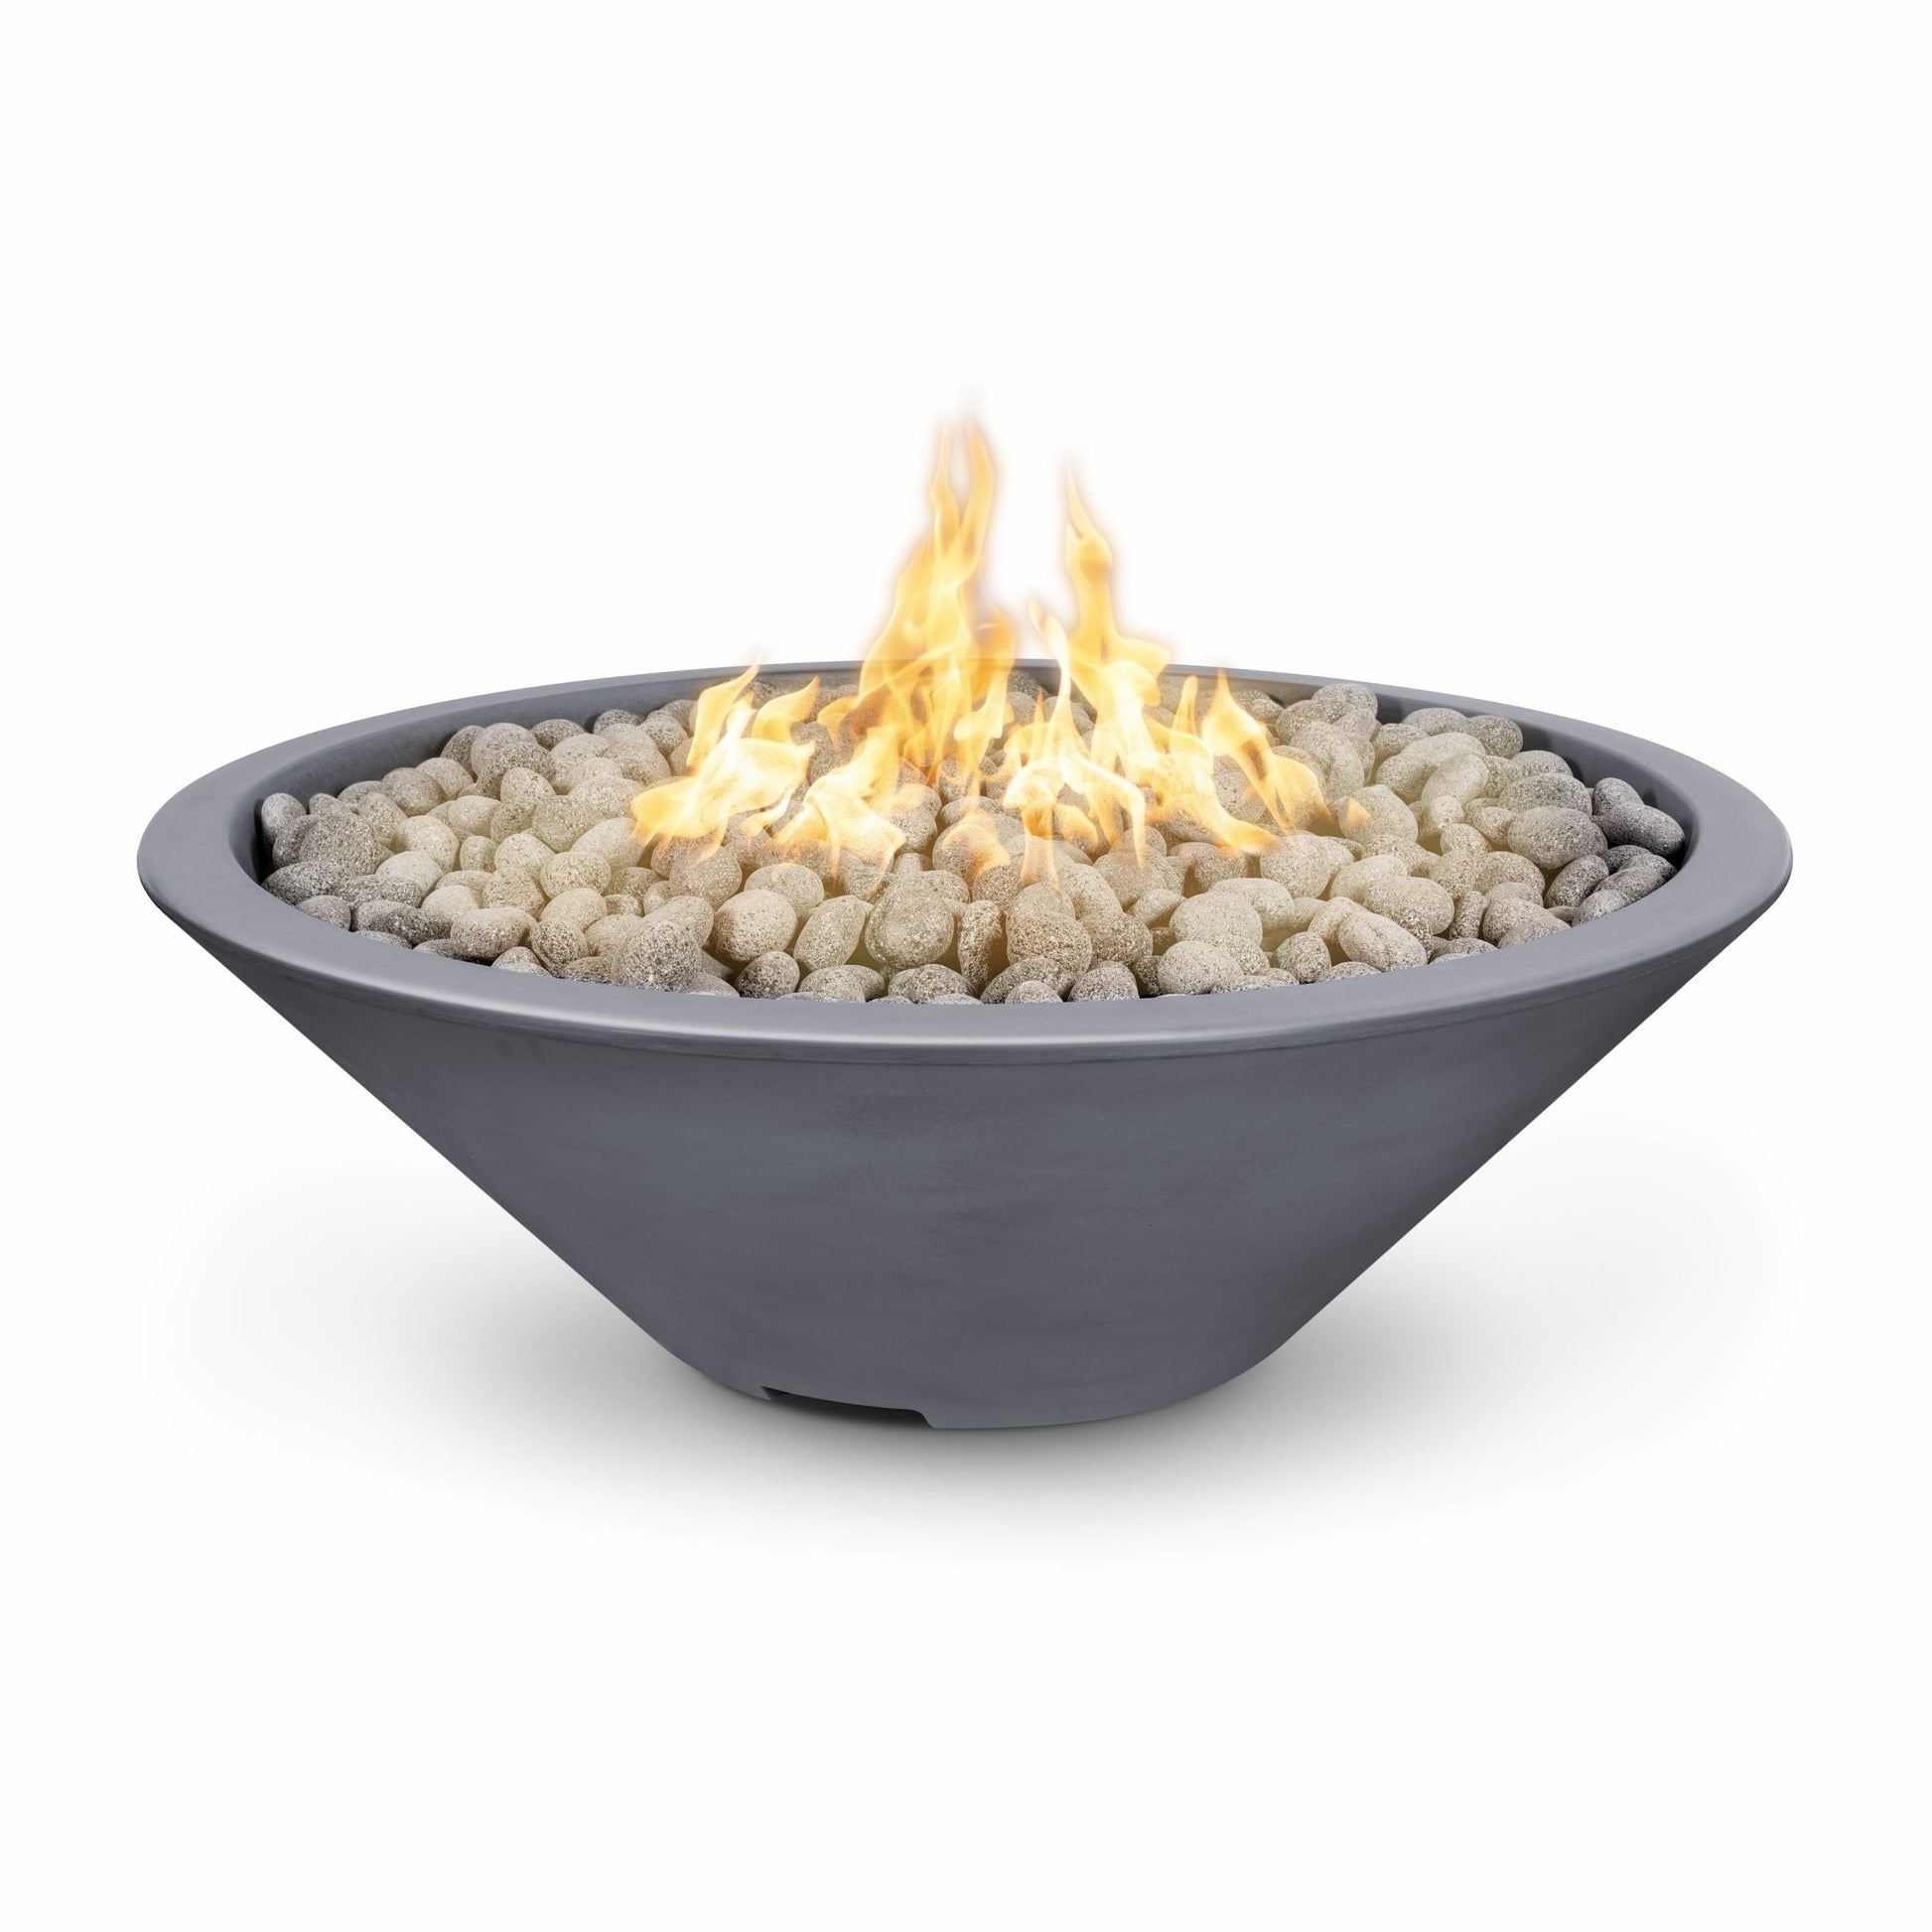 The Outdoor Plus Round Cazo 48" Pewter Powder Coated Metal Liquid Propane Fire Pit with Match Lit Ignition